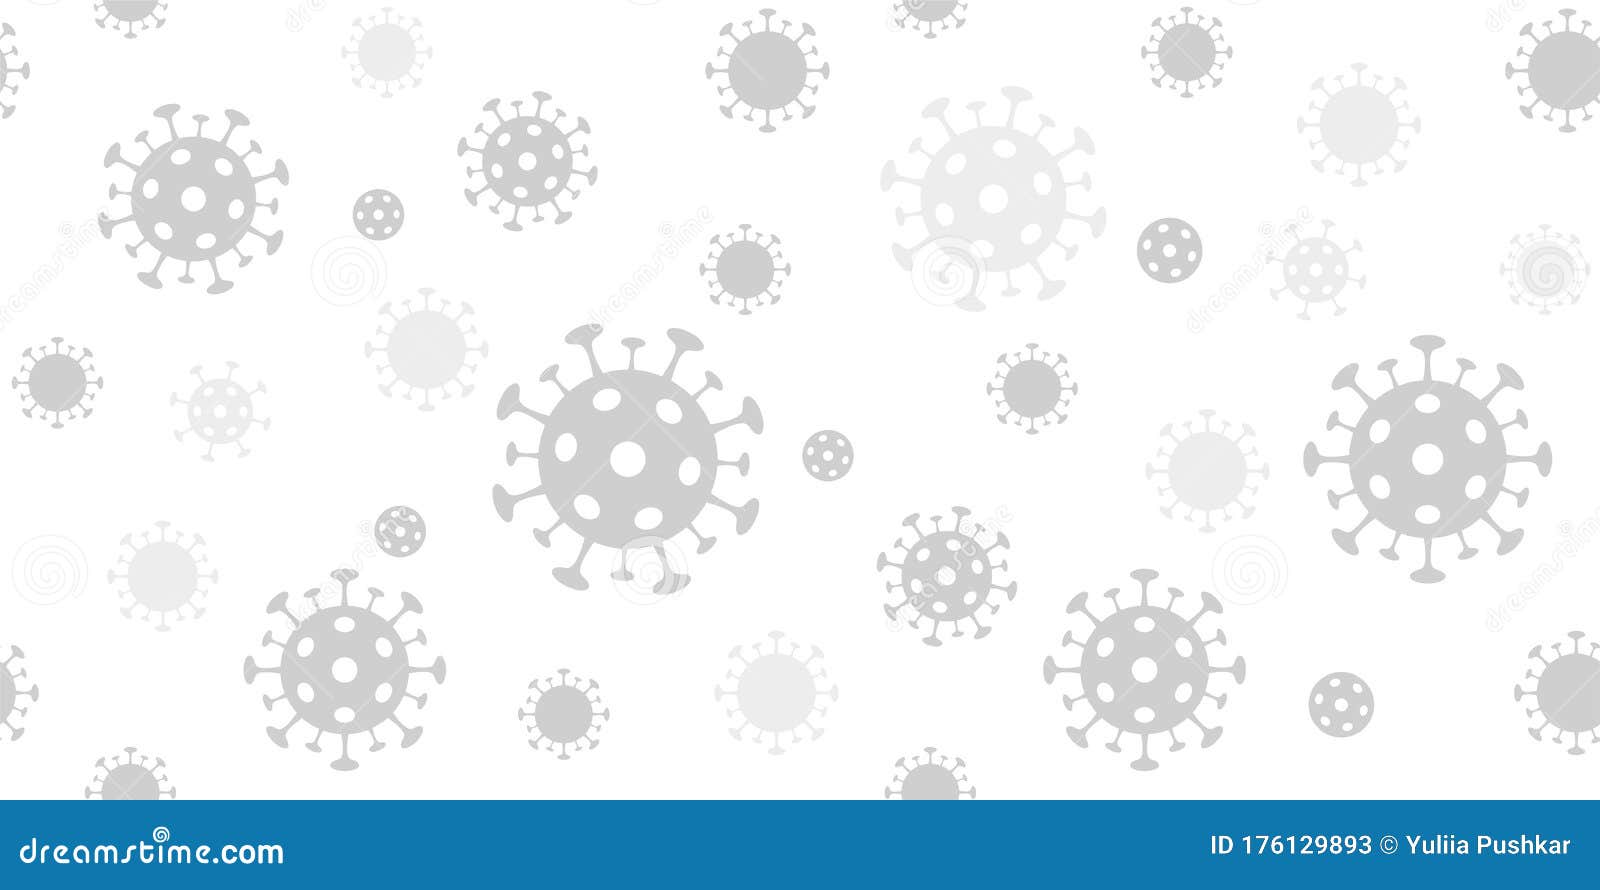 coronavirus background.  seamless pattern with covid-19 virus sign. light gray backdrop for banners